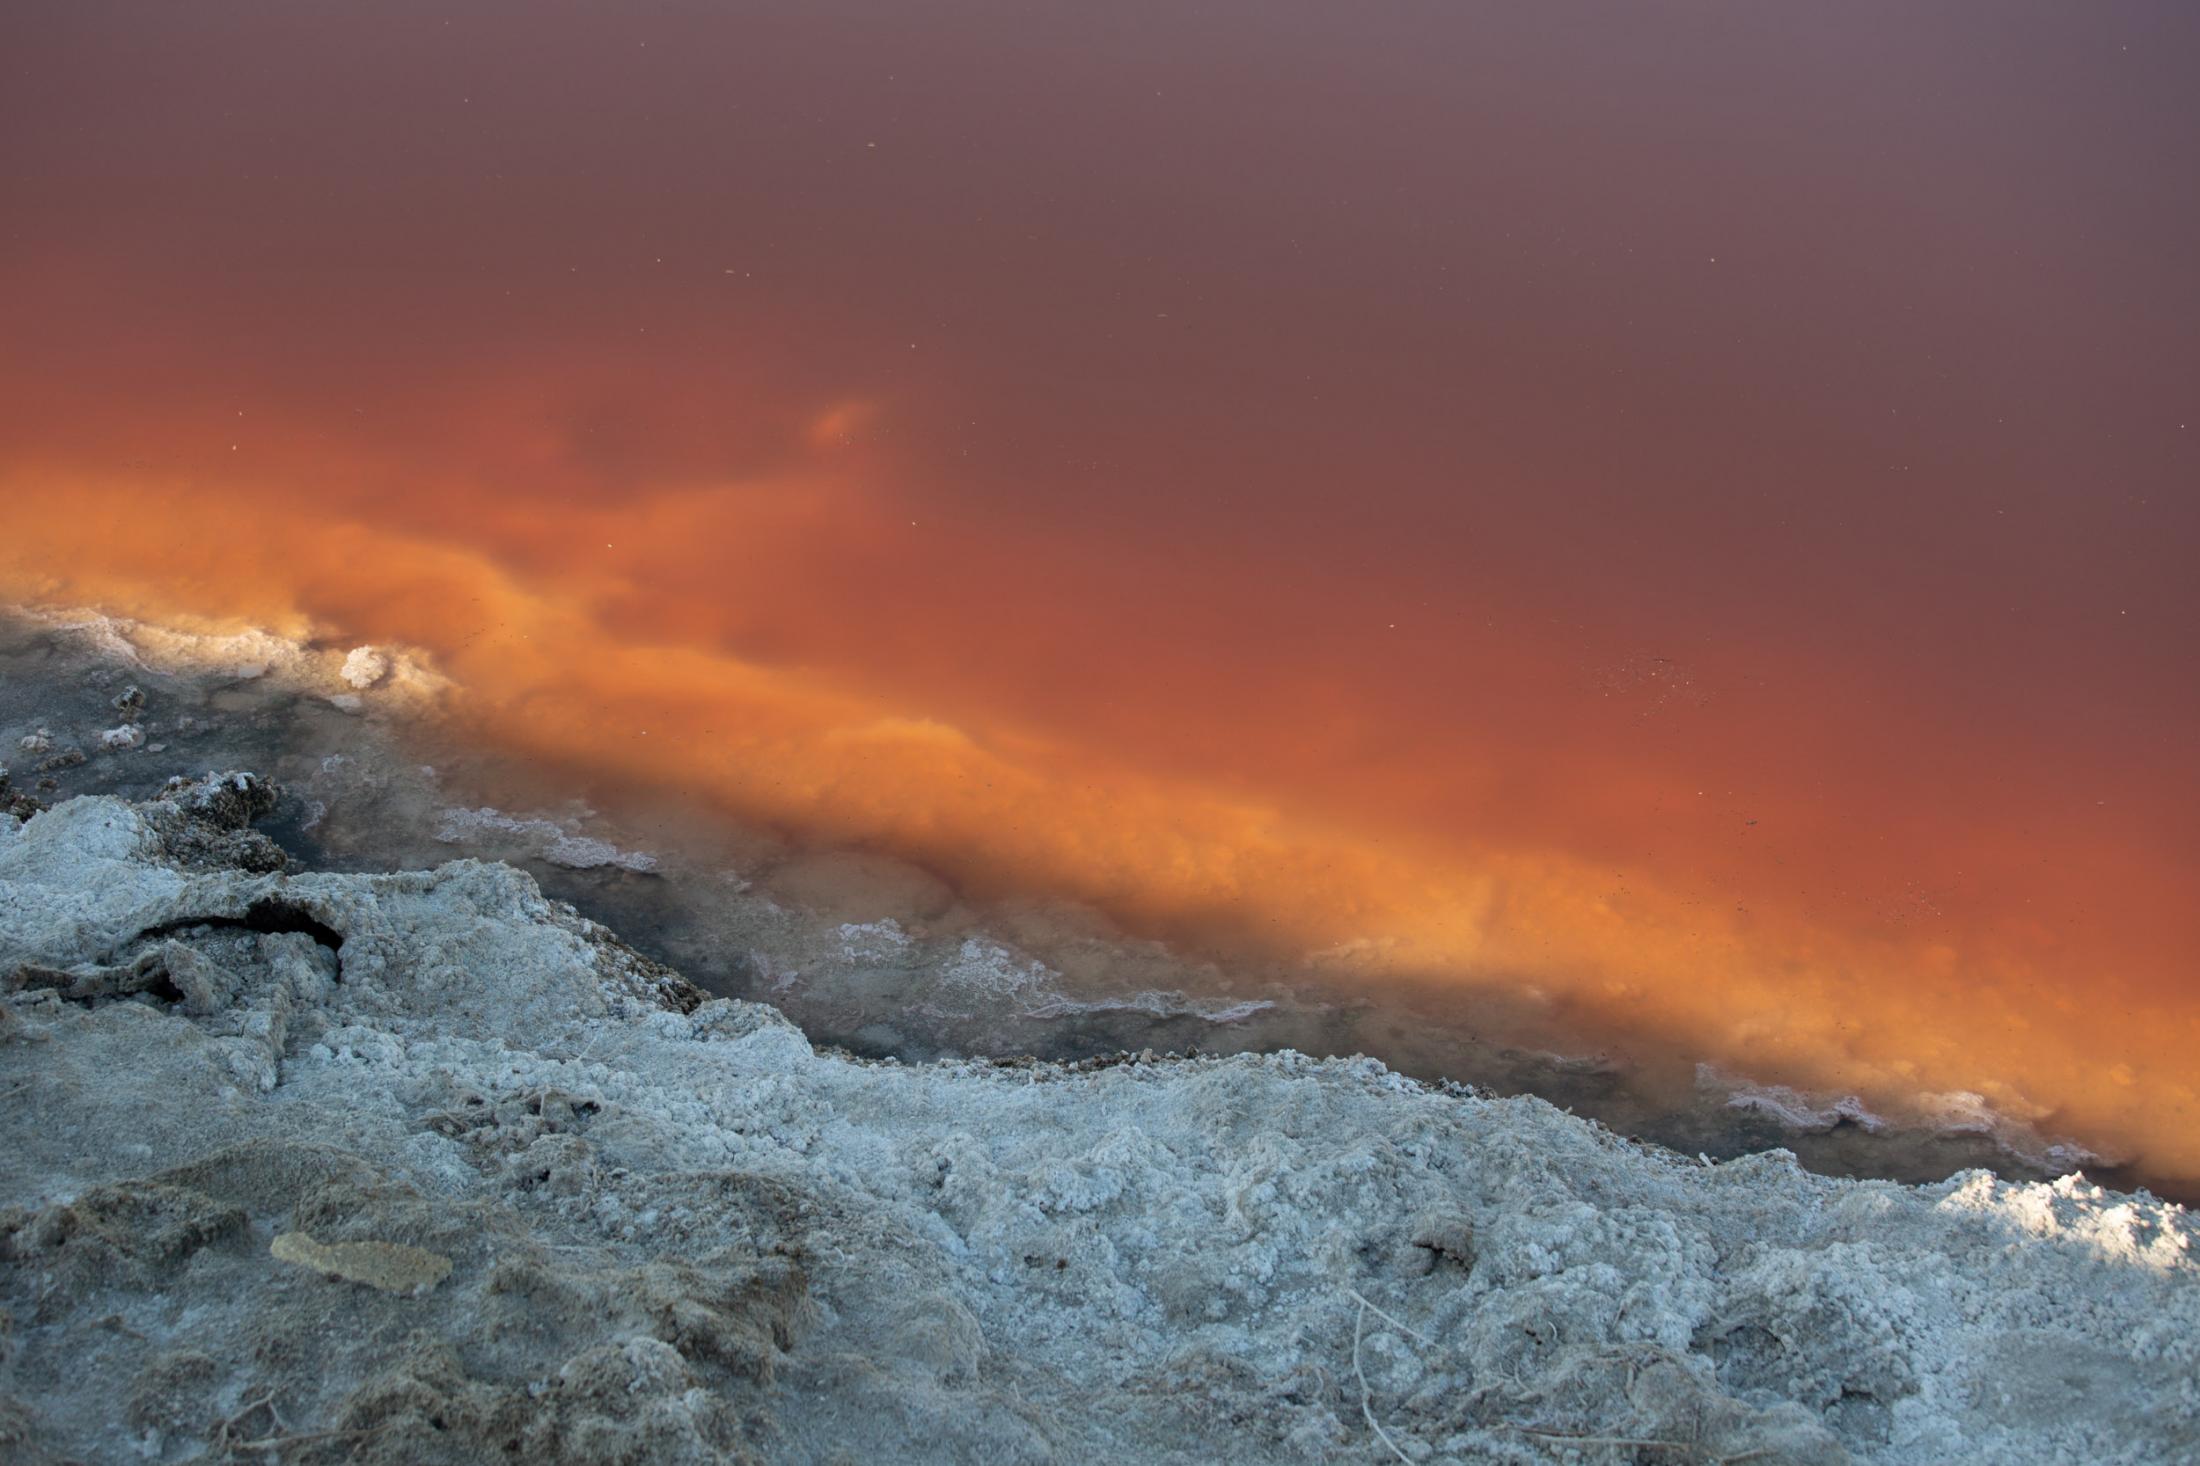  - The Salton Sea -  The sea's edge is a bright orange red as the water...